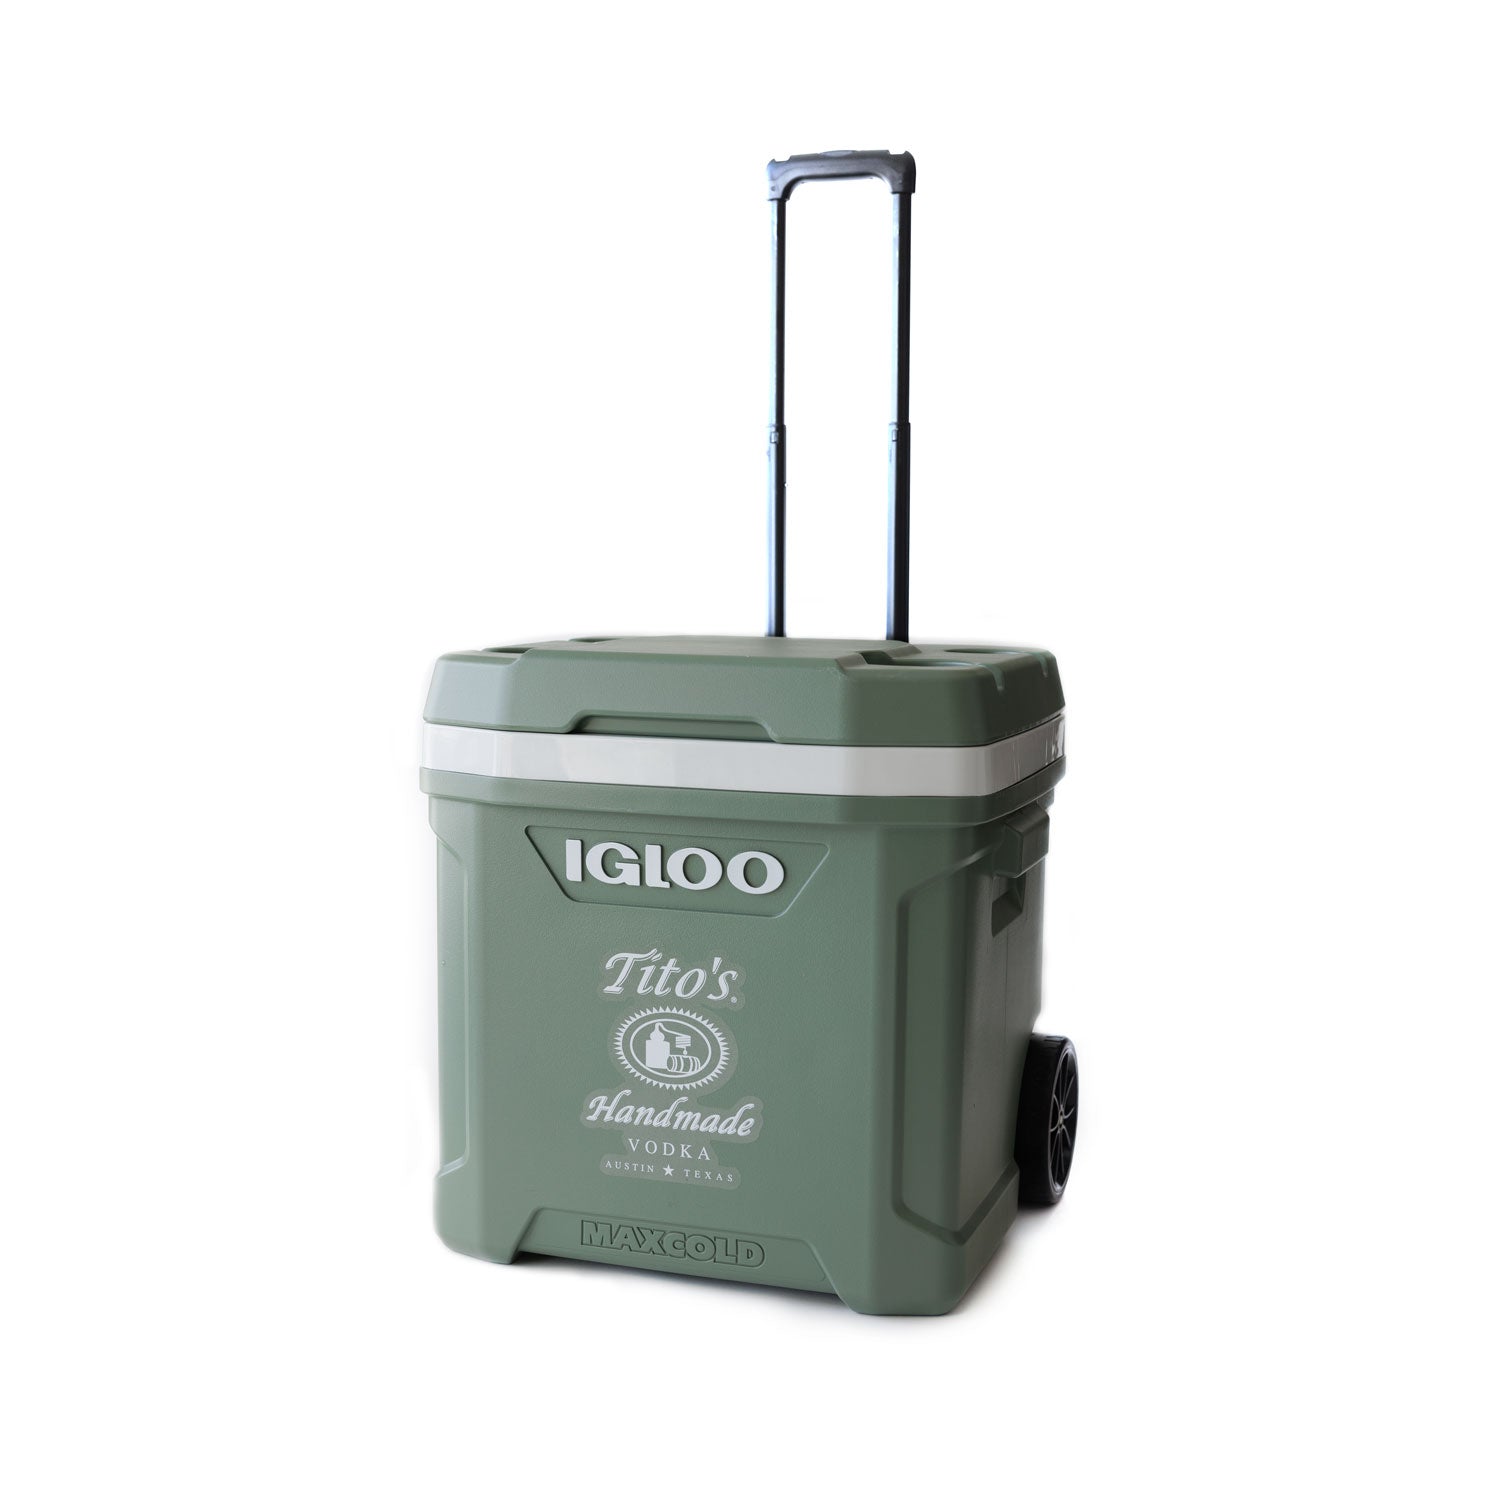 Front of green Igloo ECOCOOL 60-quart cooler with Tito's Handmade Vodka logo, wheels, and extendible handle